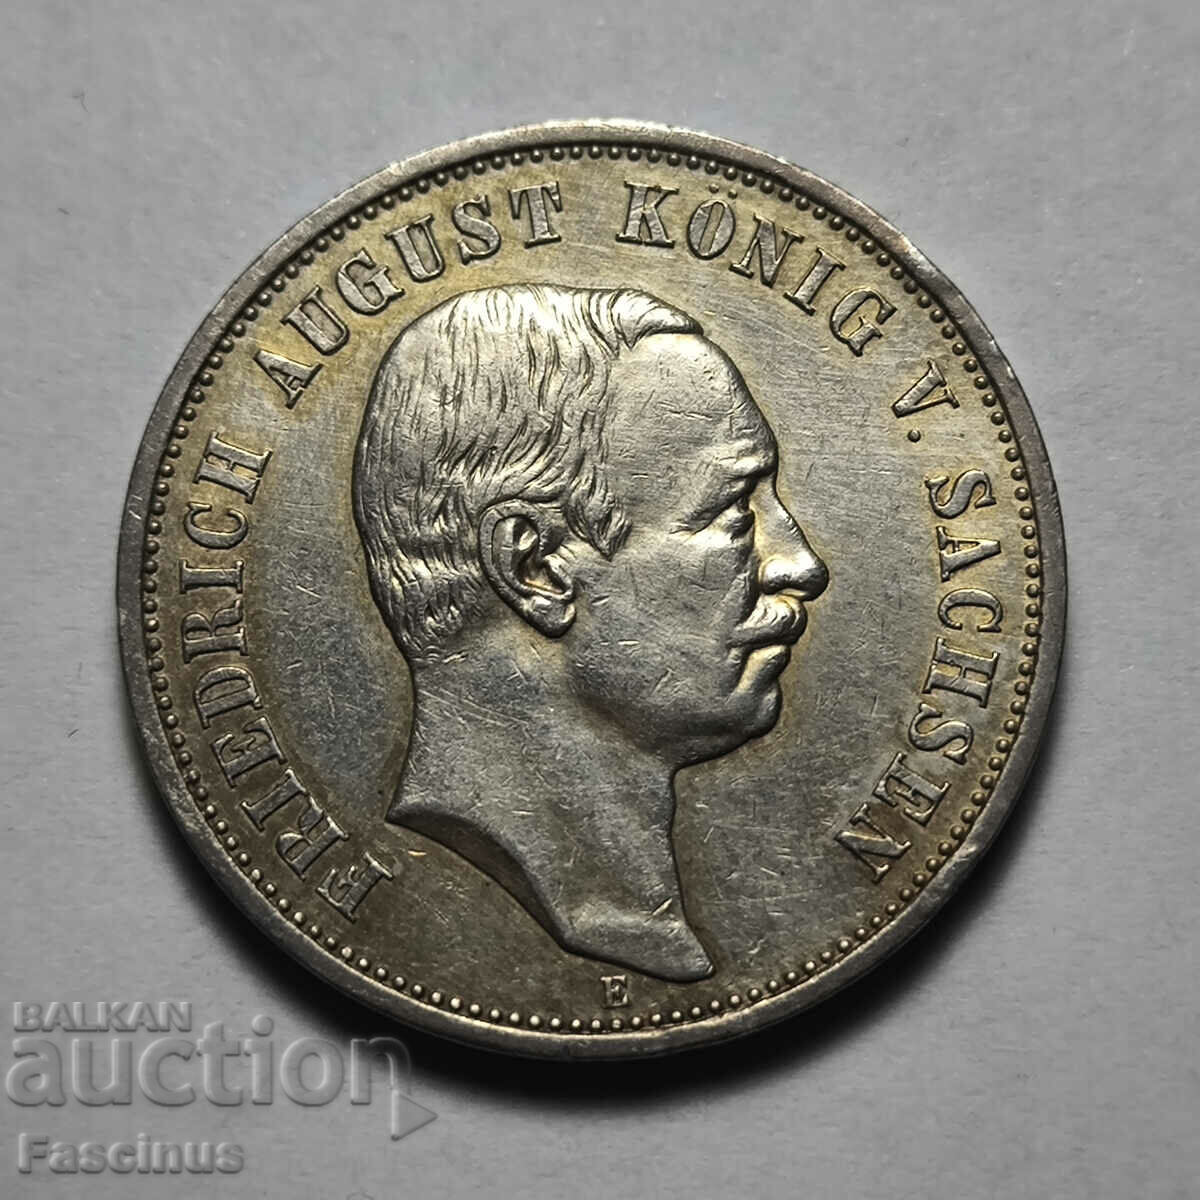 Silver coin 3 marks 1911 Saxony Germany